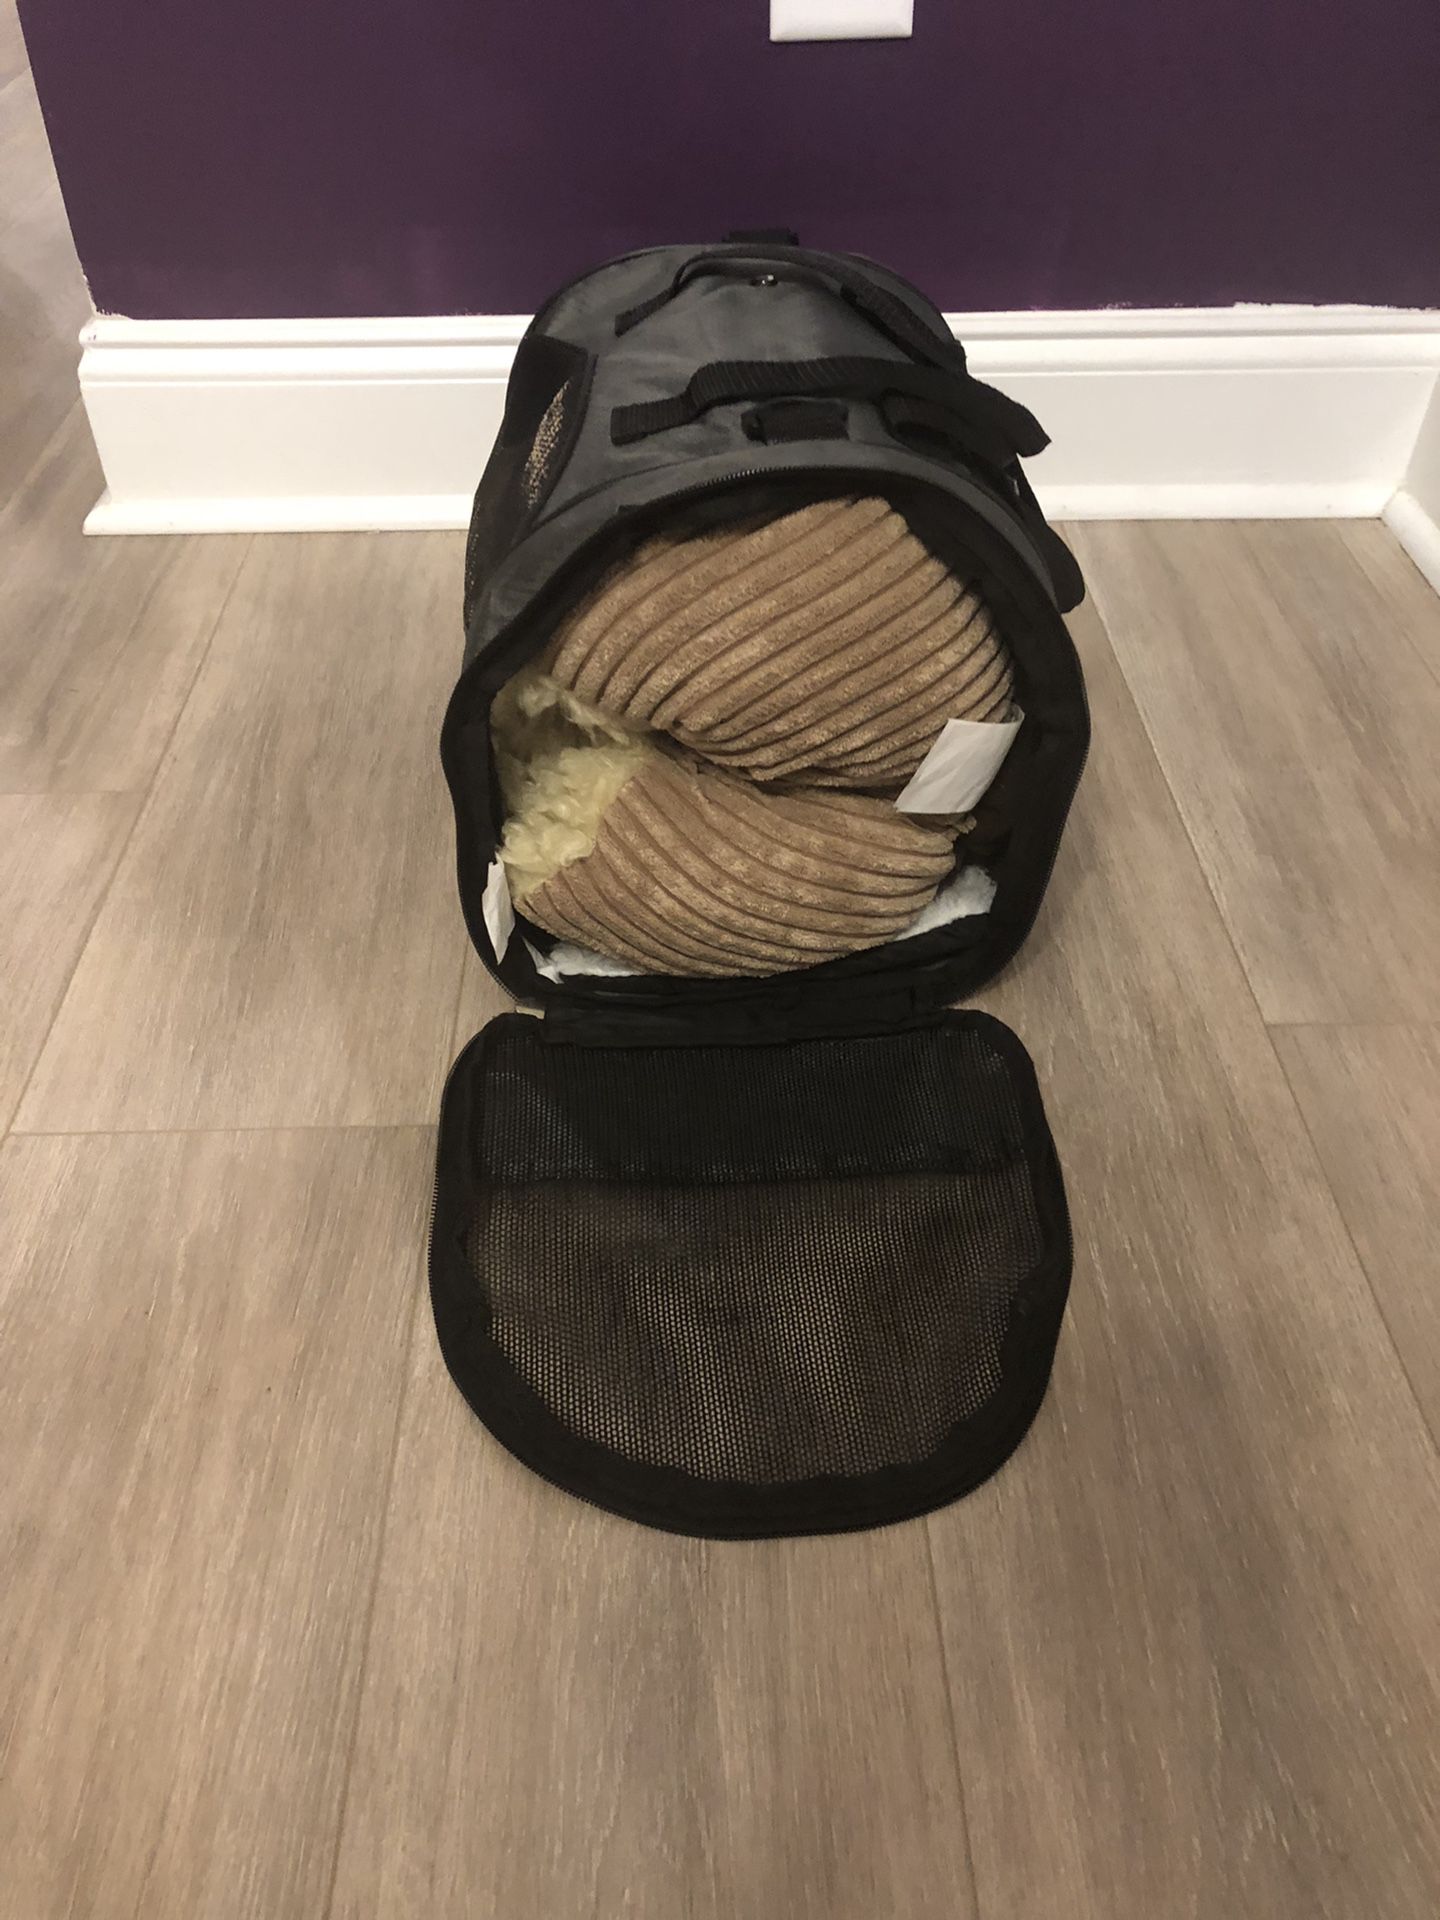 Dog Items For Sale 